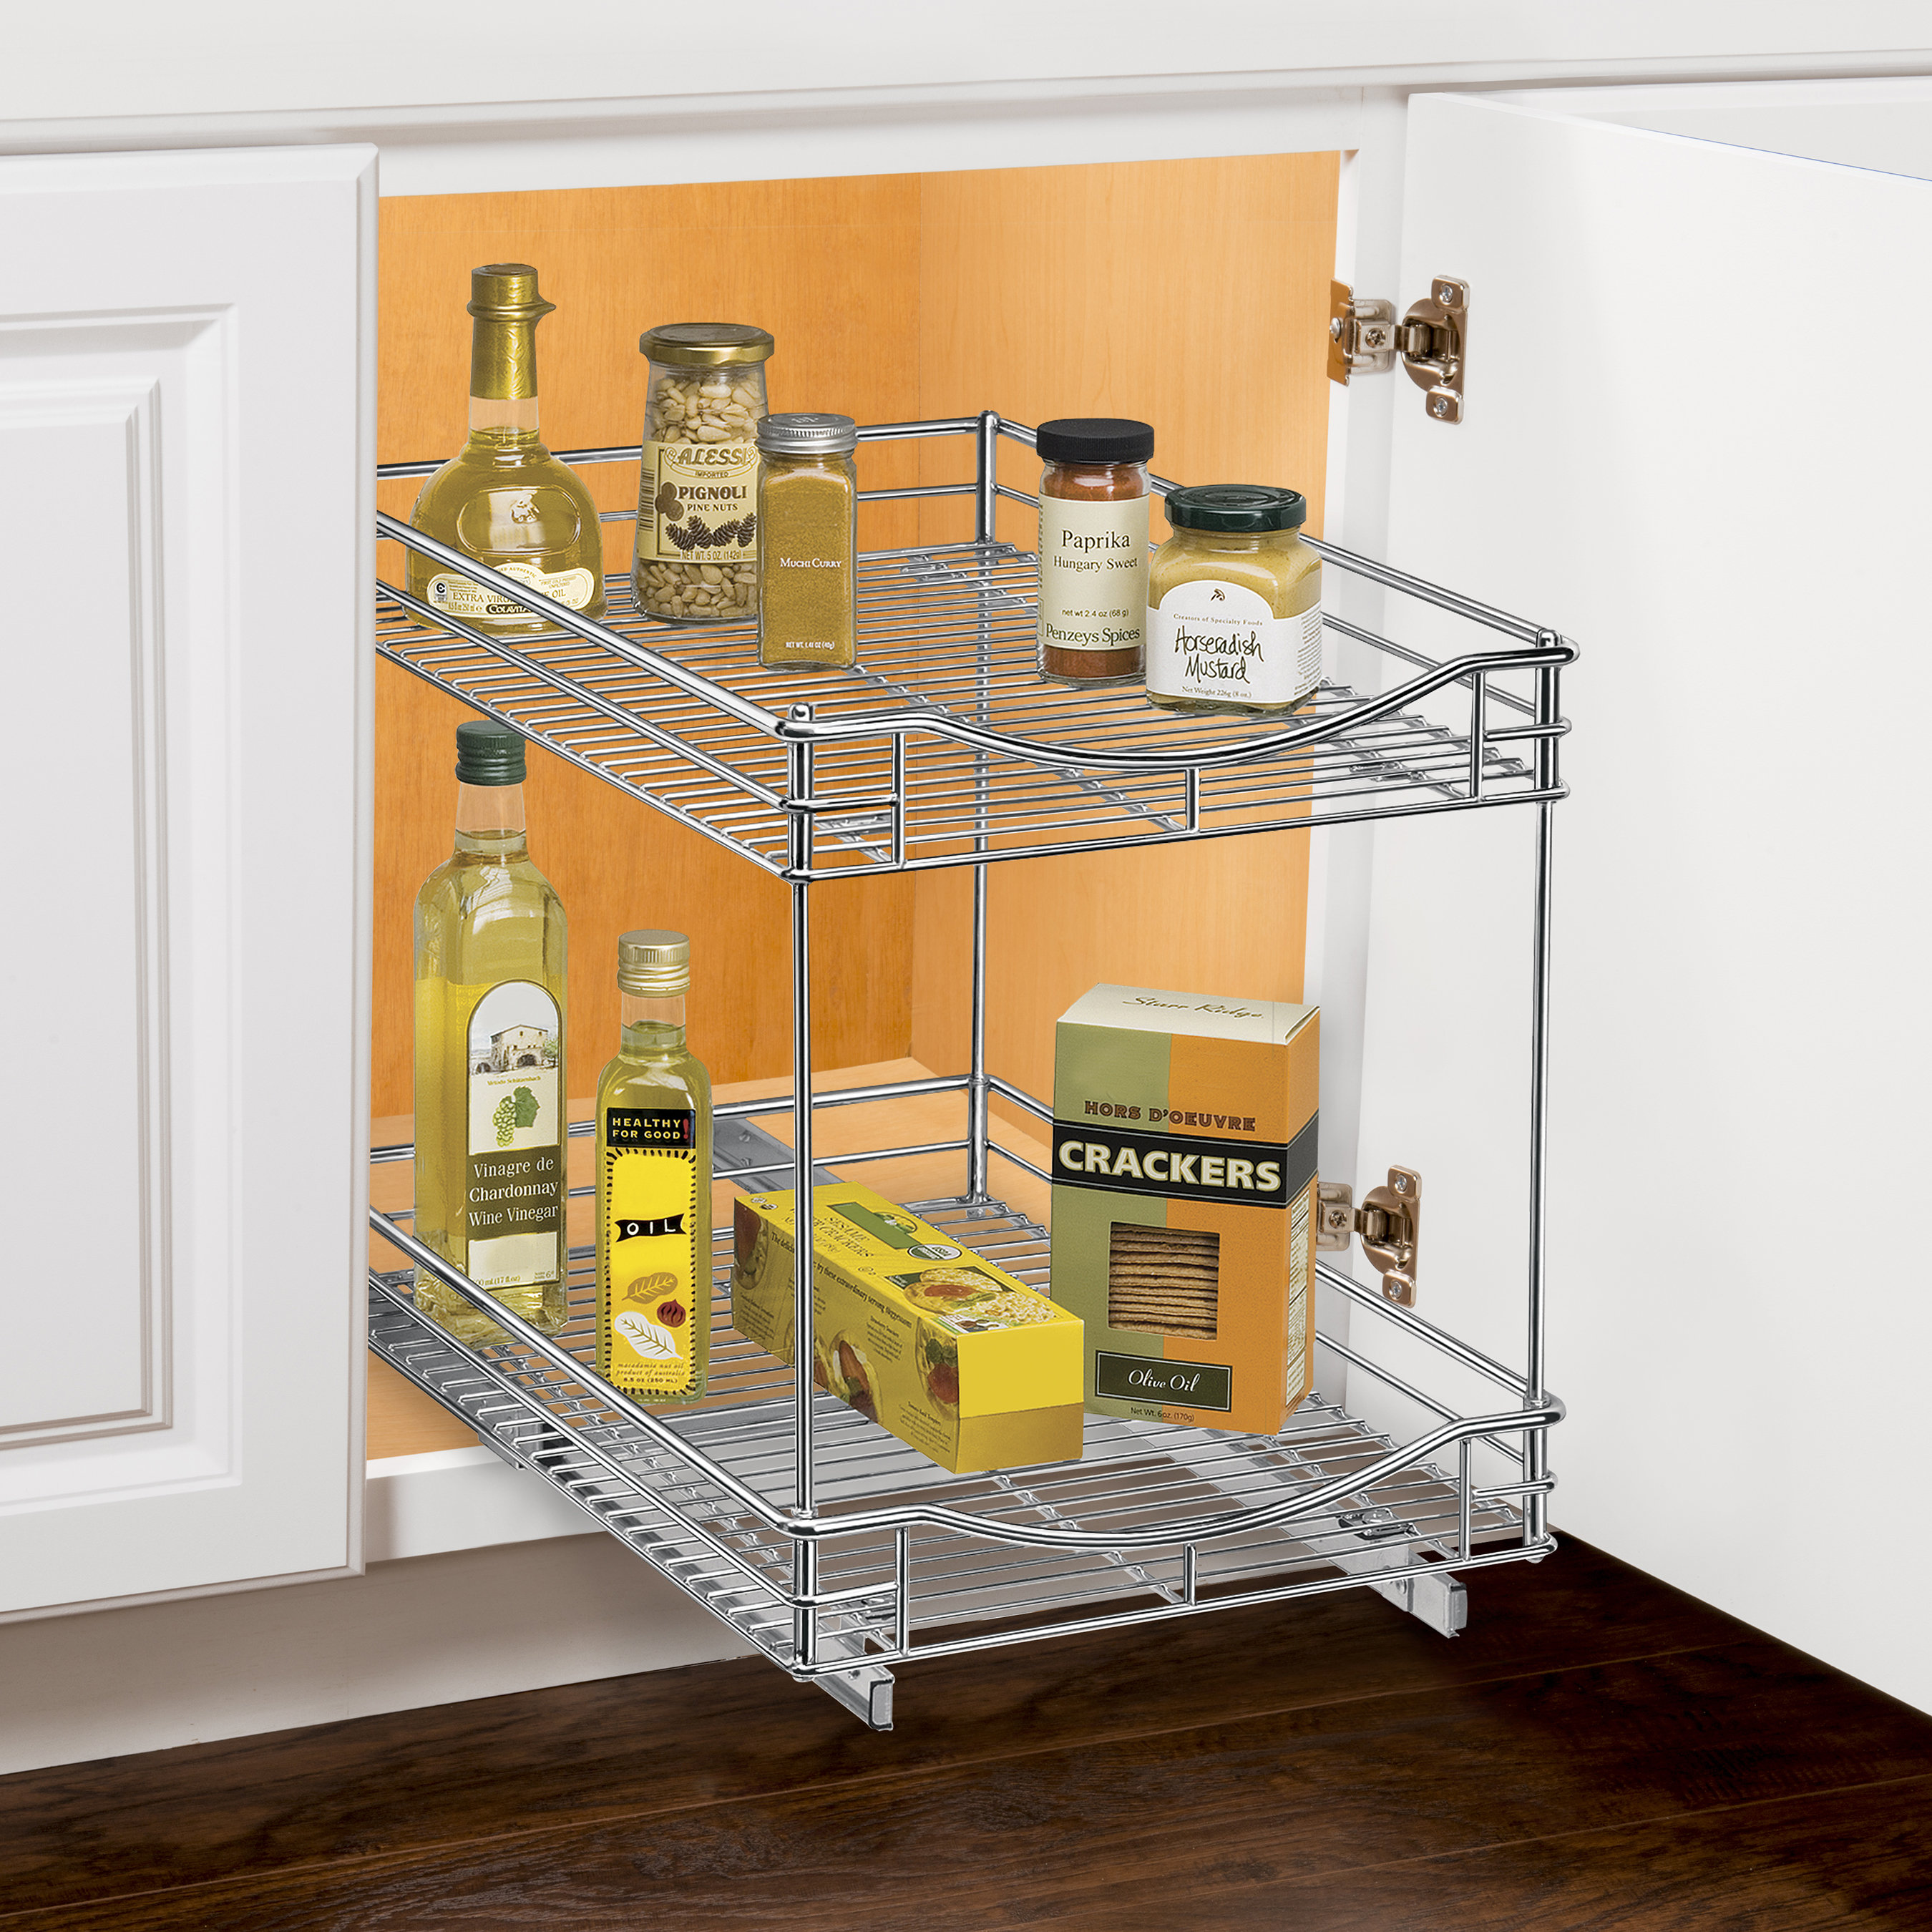 Roll Out Double Shelf   Pull Out Two Tier Sliding Under Cabinet Organizer   11 Inch Wide X 18 Inch Deep   Chrome 